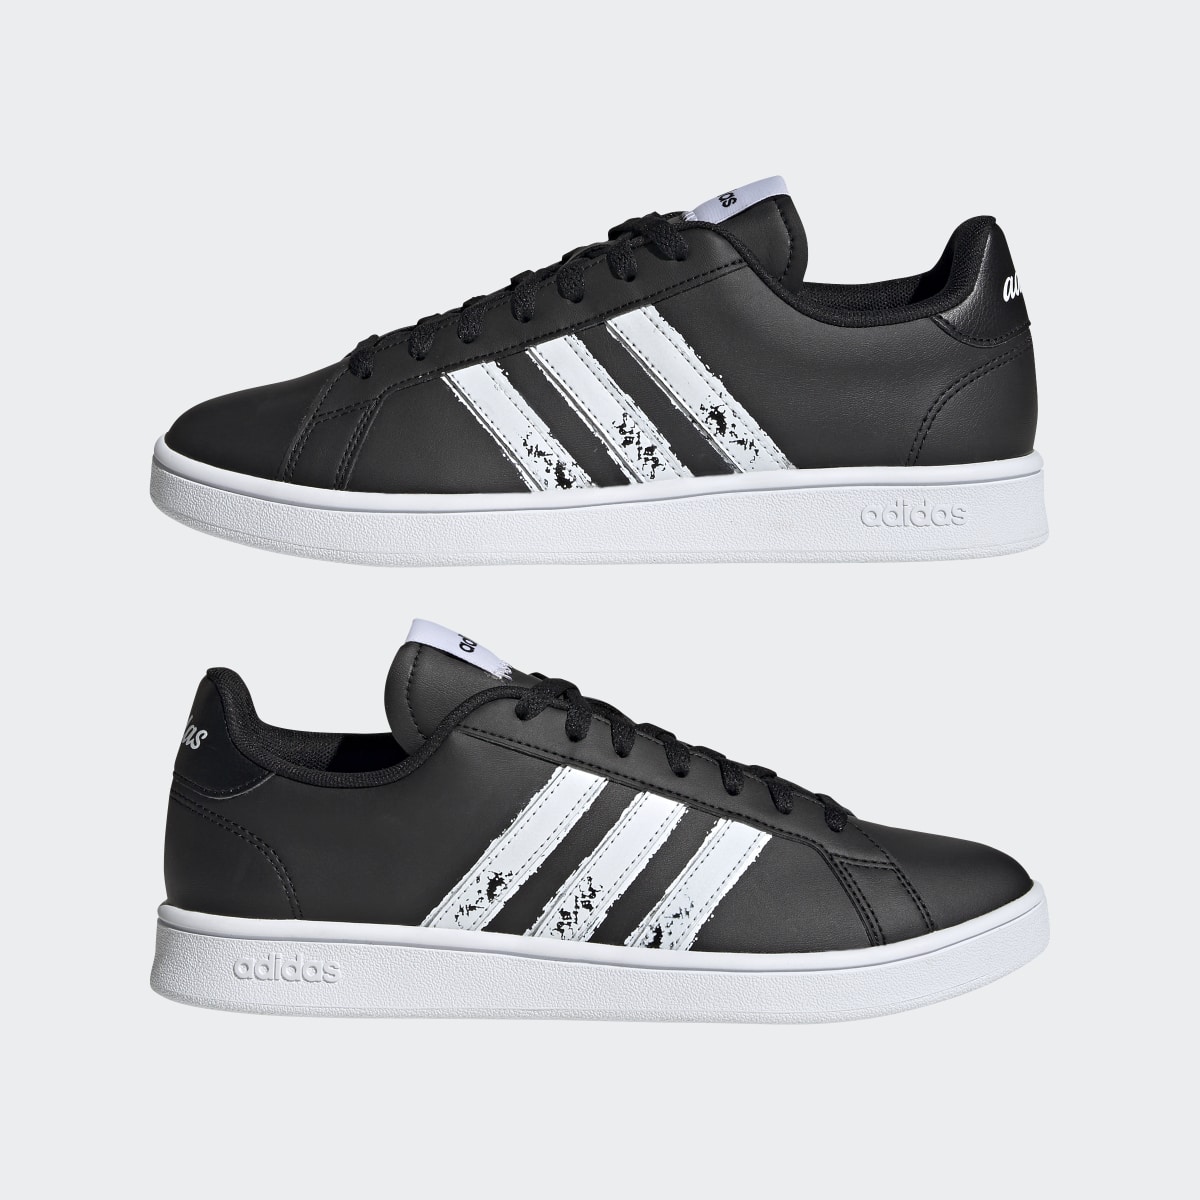 Adidas Grand Court Base Beyond Shoes. 8